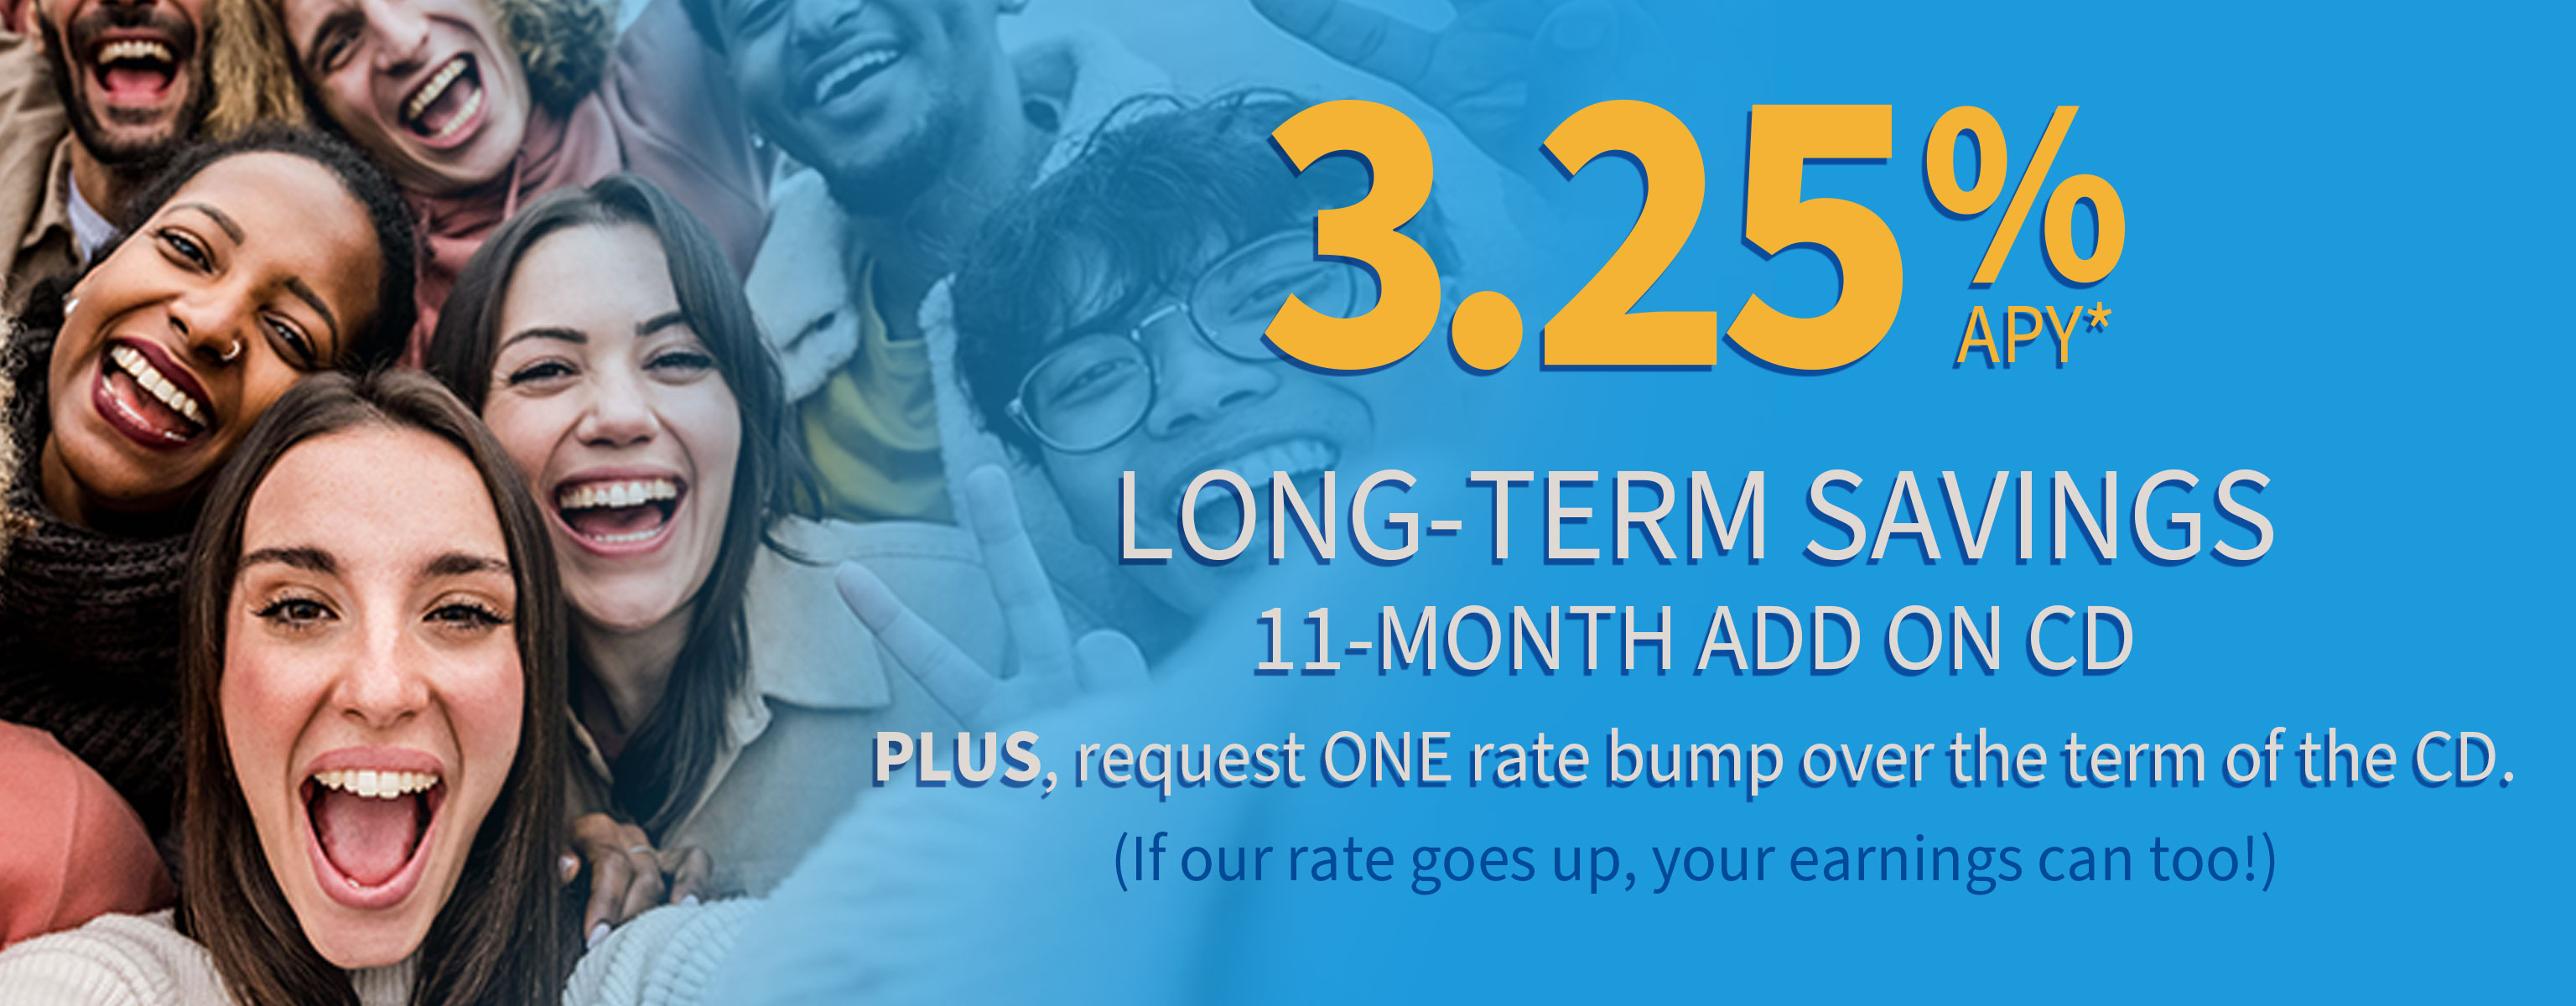 11-Month ADD-ON CD Special, Long-Term Savings - take advantage of 3.25% APY*